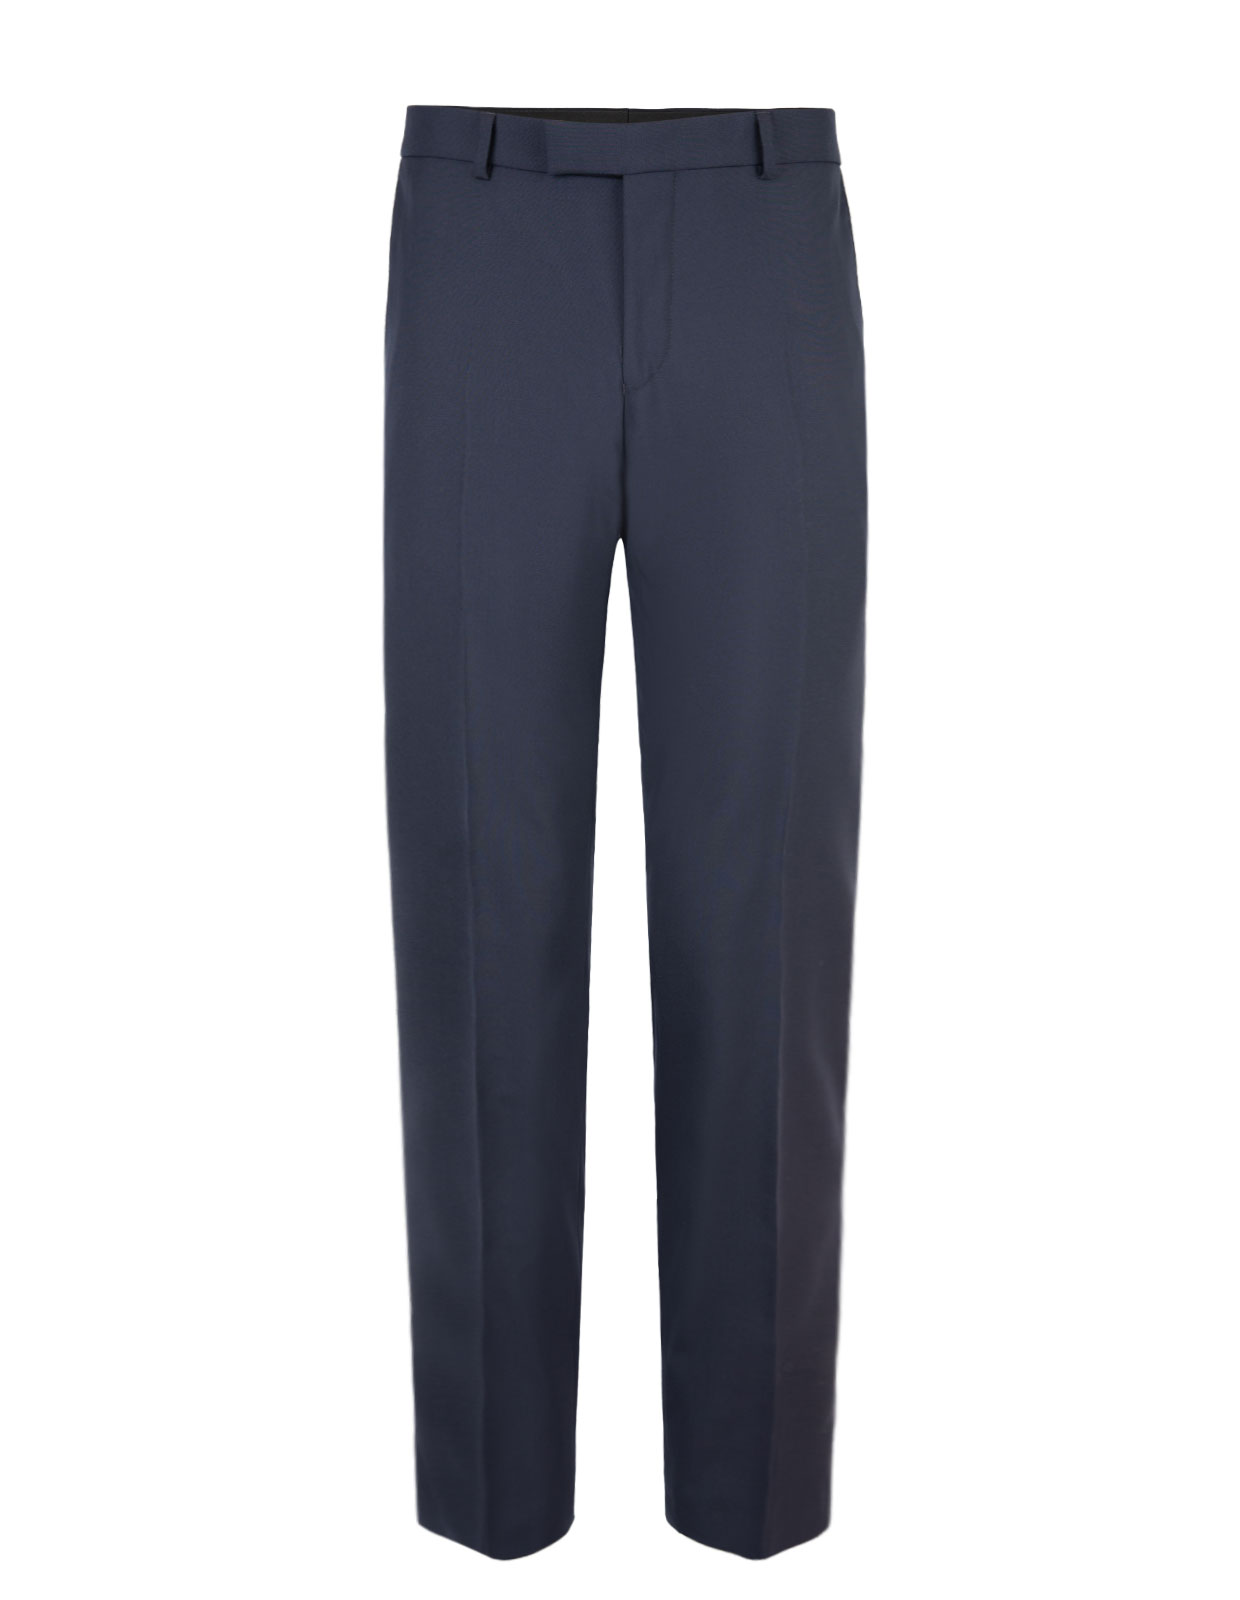 Diego Suit Trousers Regular Fit Mix & Match Wool Navy